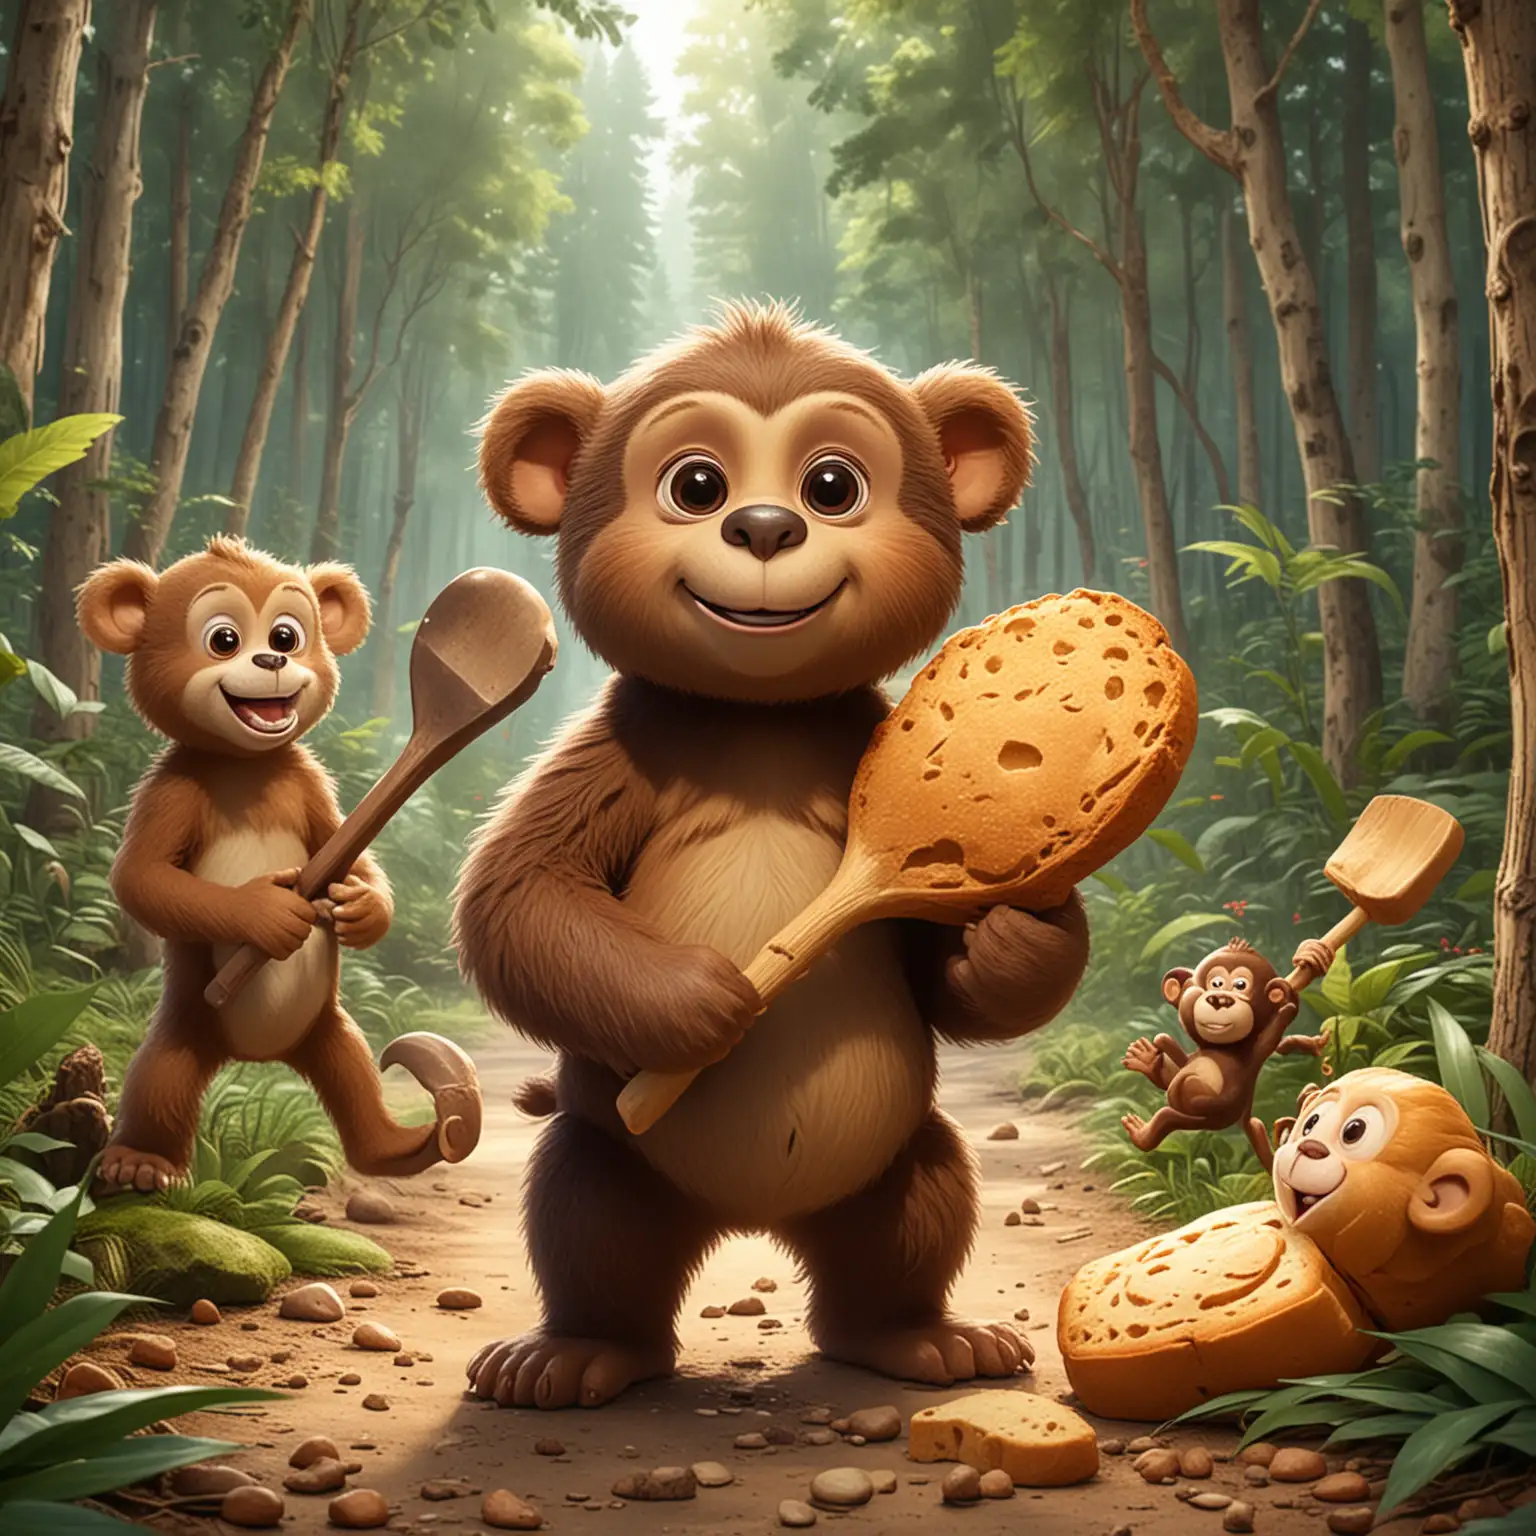 a cute cartoon bear, holding a shovel, and a monkey holding a bread, happily playing in the forest